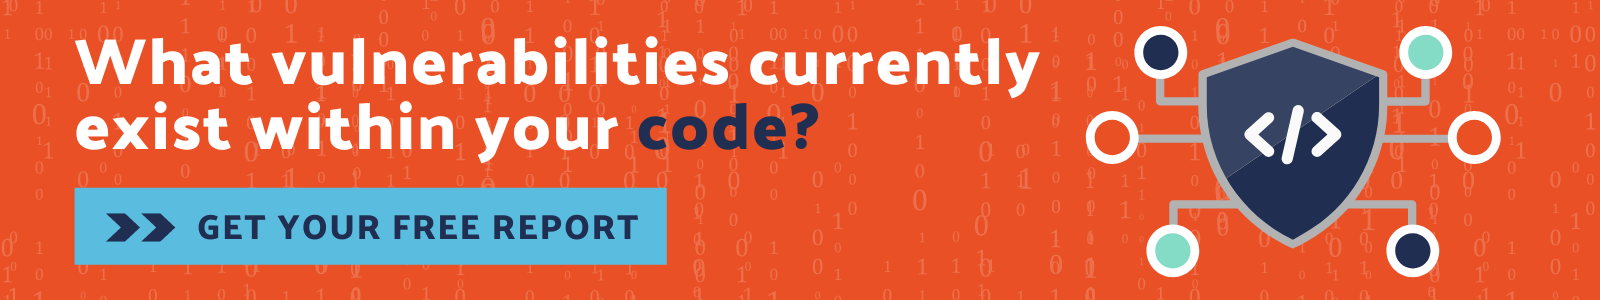 What vulnerabilities are currently in your code?